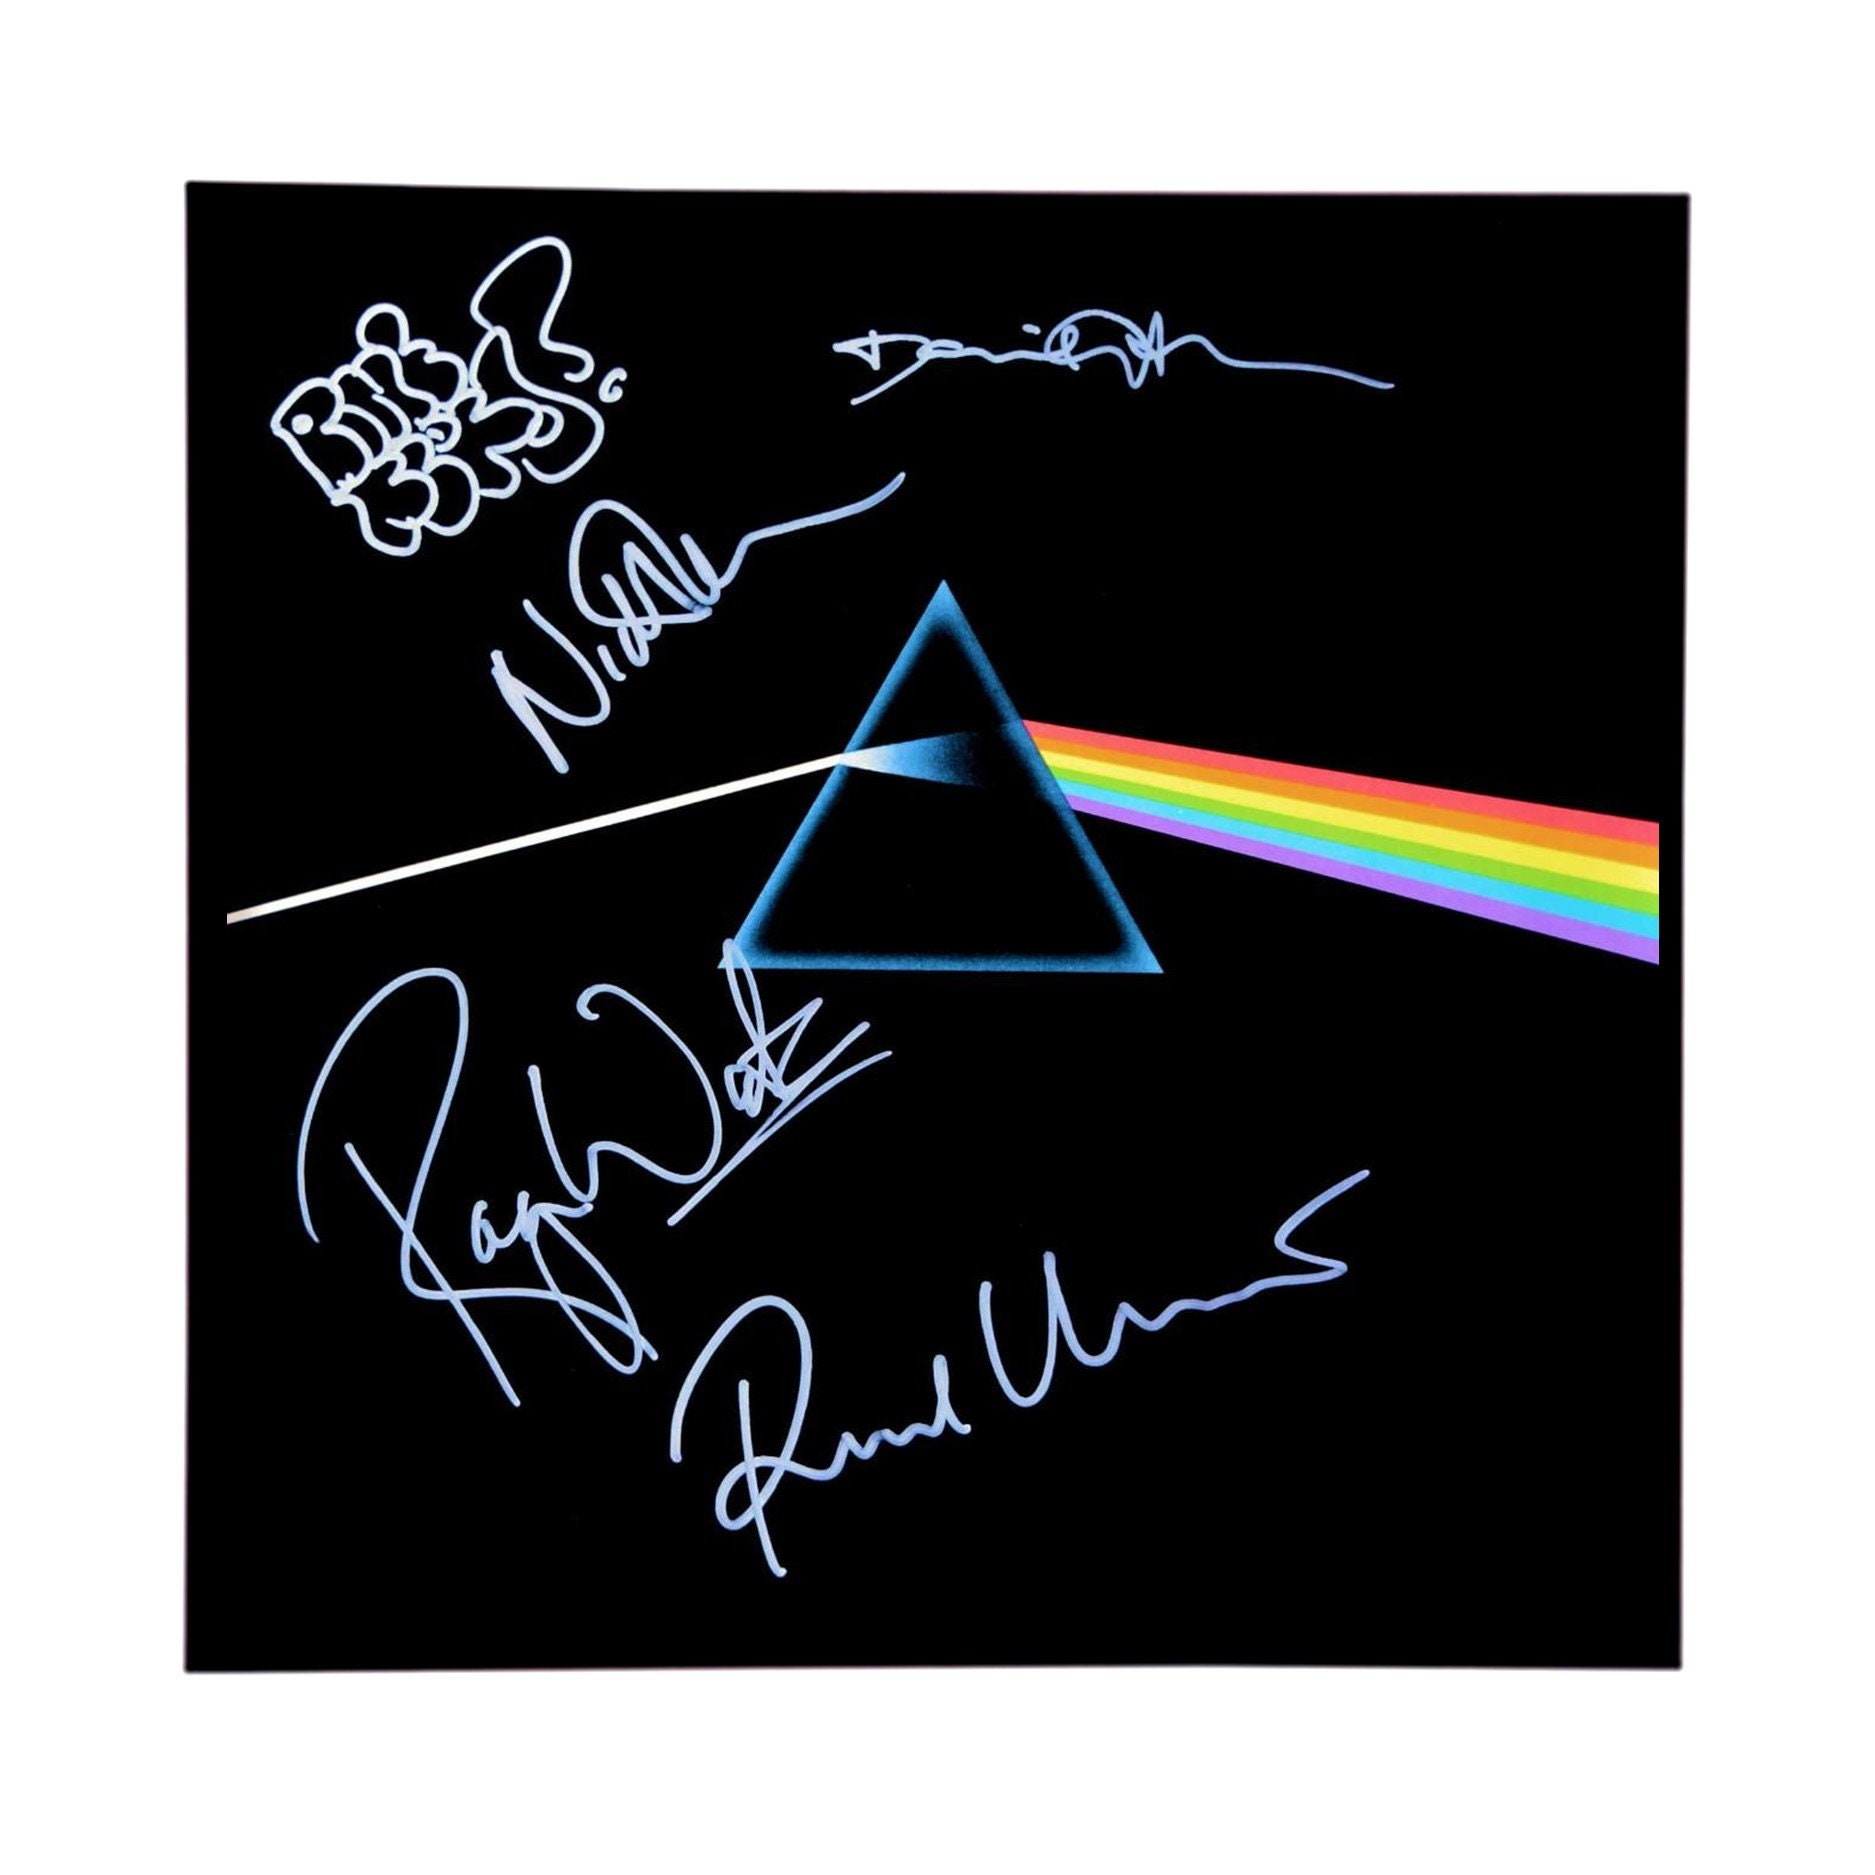 PINK FLOYD. Gold CD Award EMI Holland, signed CD+book, 11 CD, 4 DVD  (181-19). Miscellaneous - Miscellaneous - Auctionet